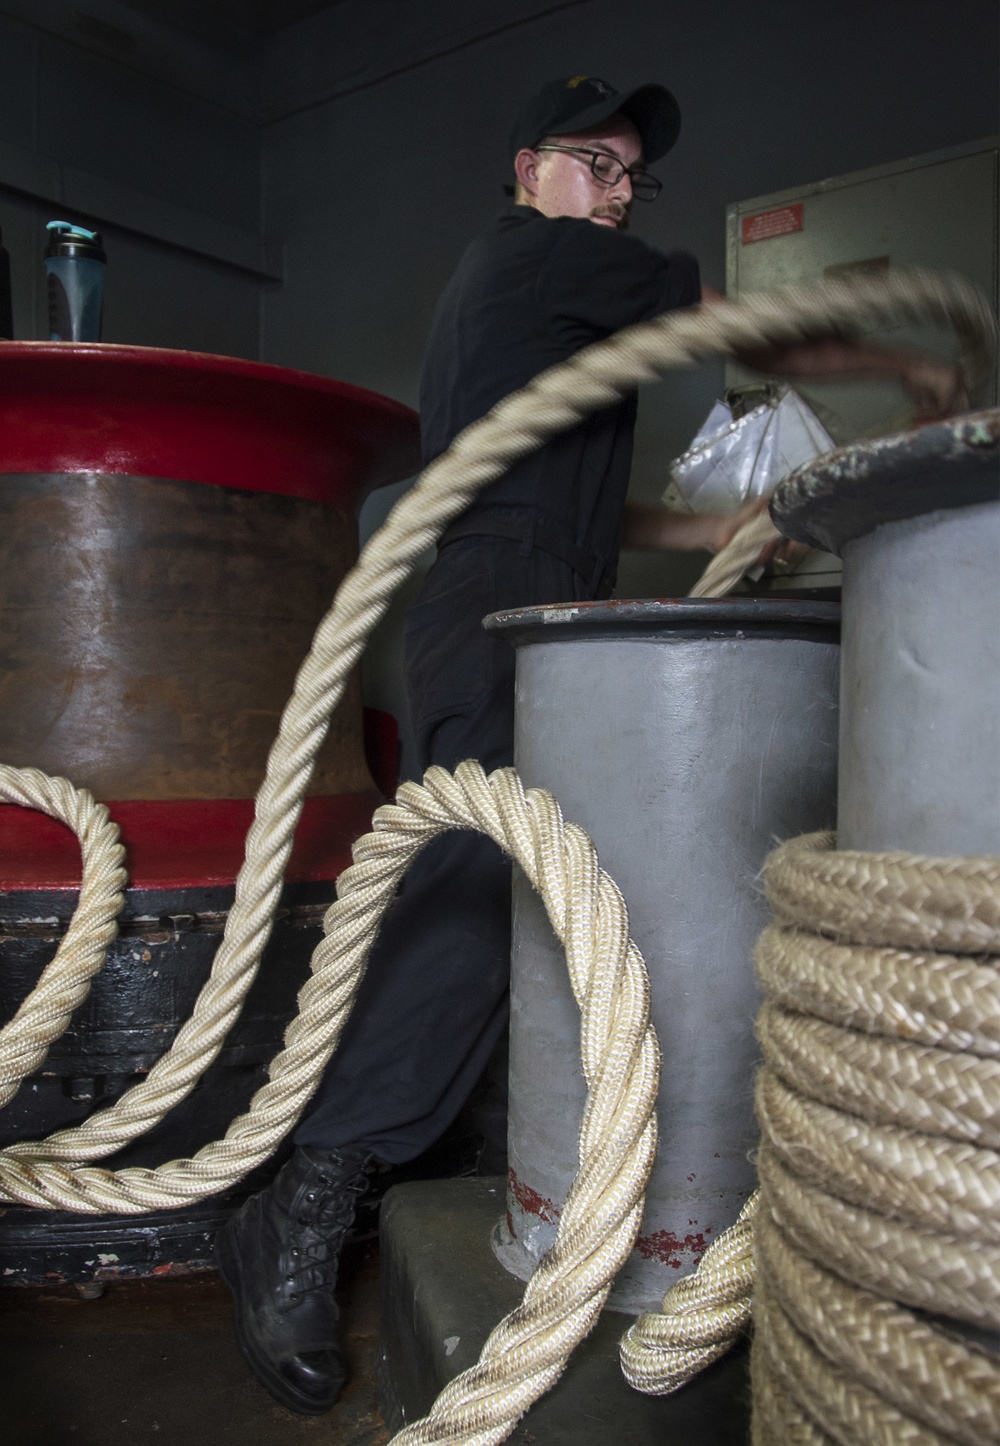 Sea and anchor detail aboard USS Bonhomme Richard (LHD 6)